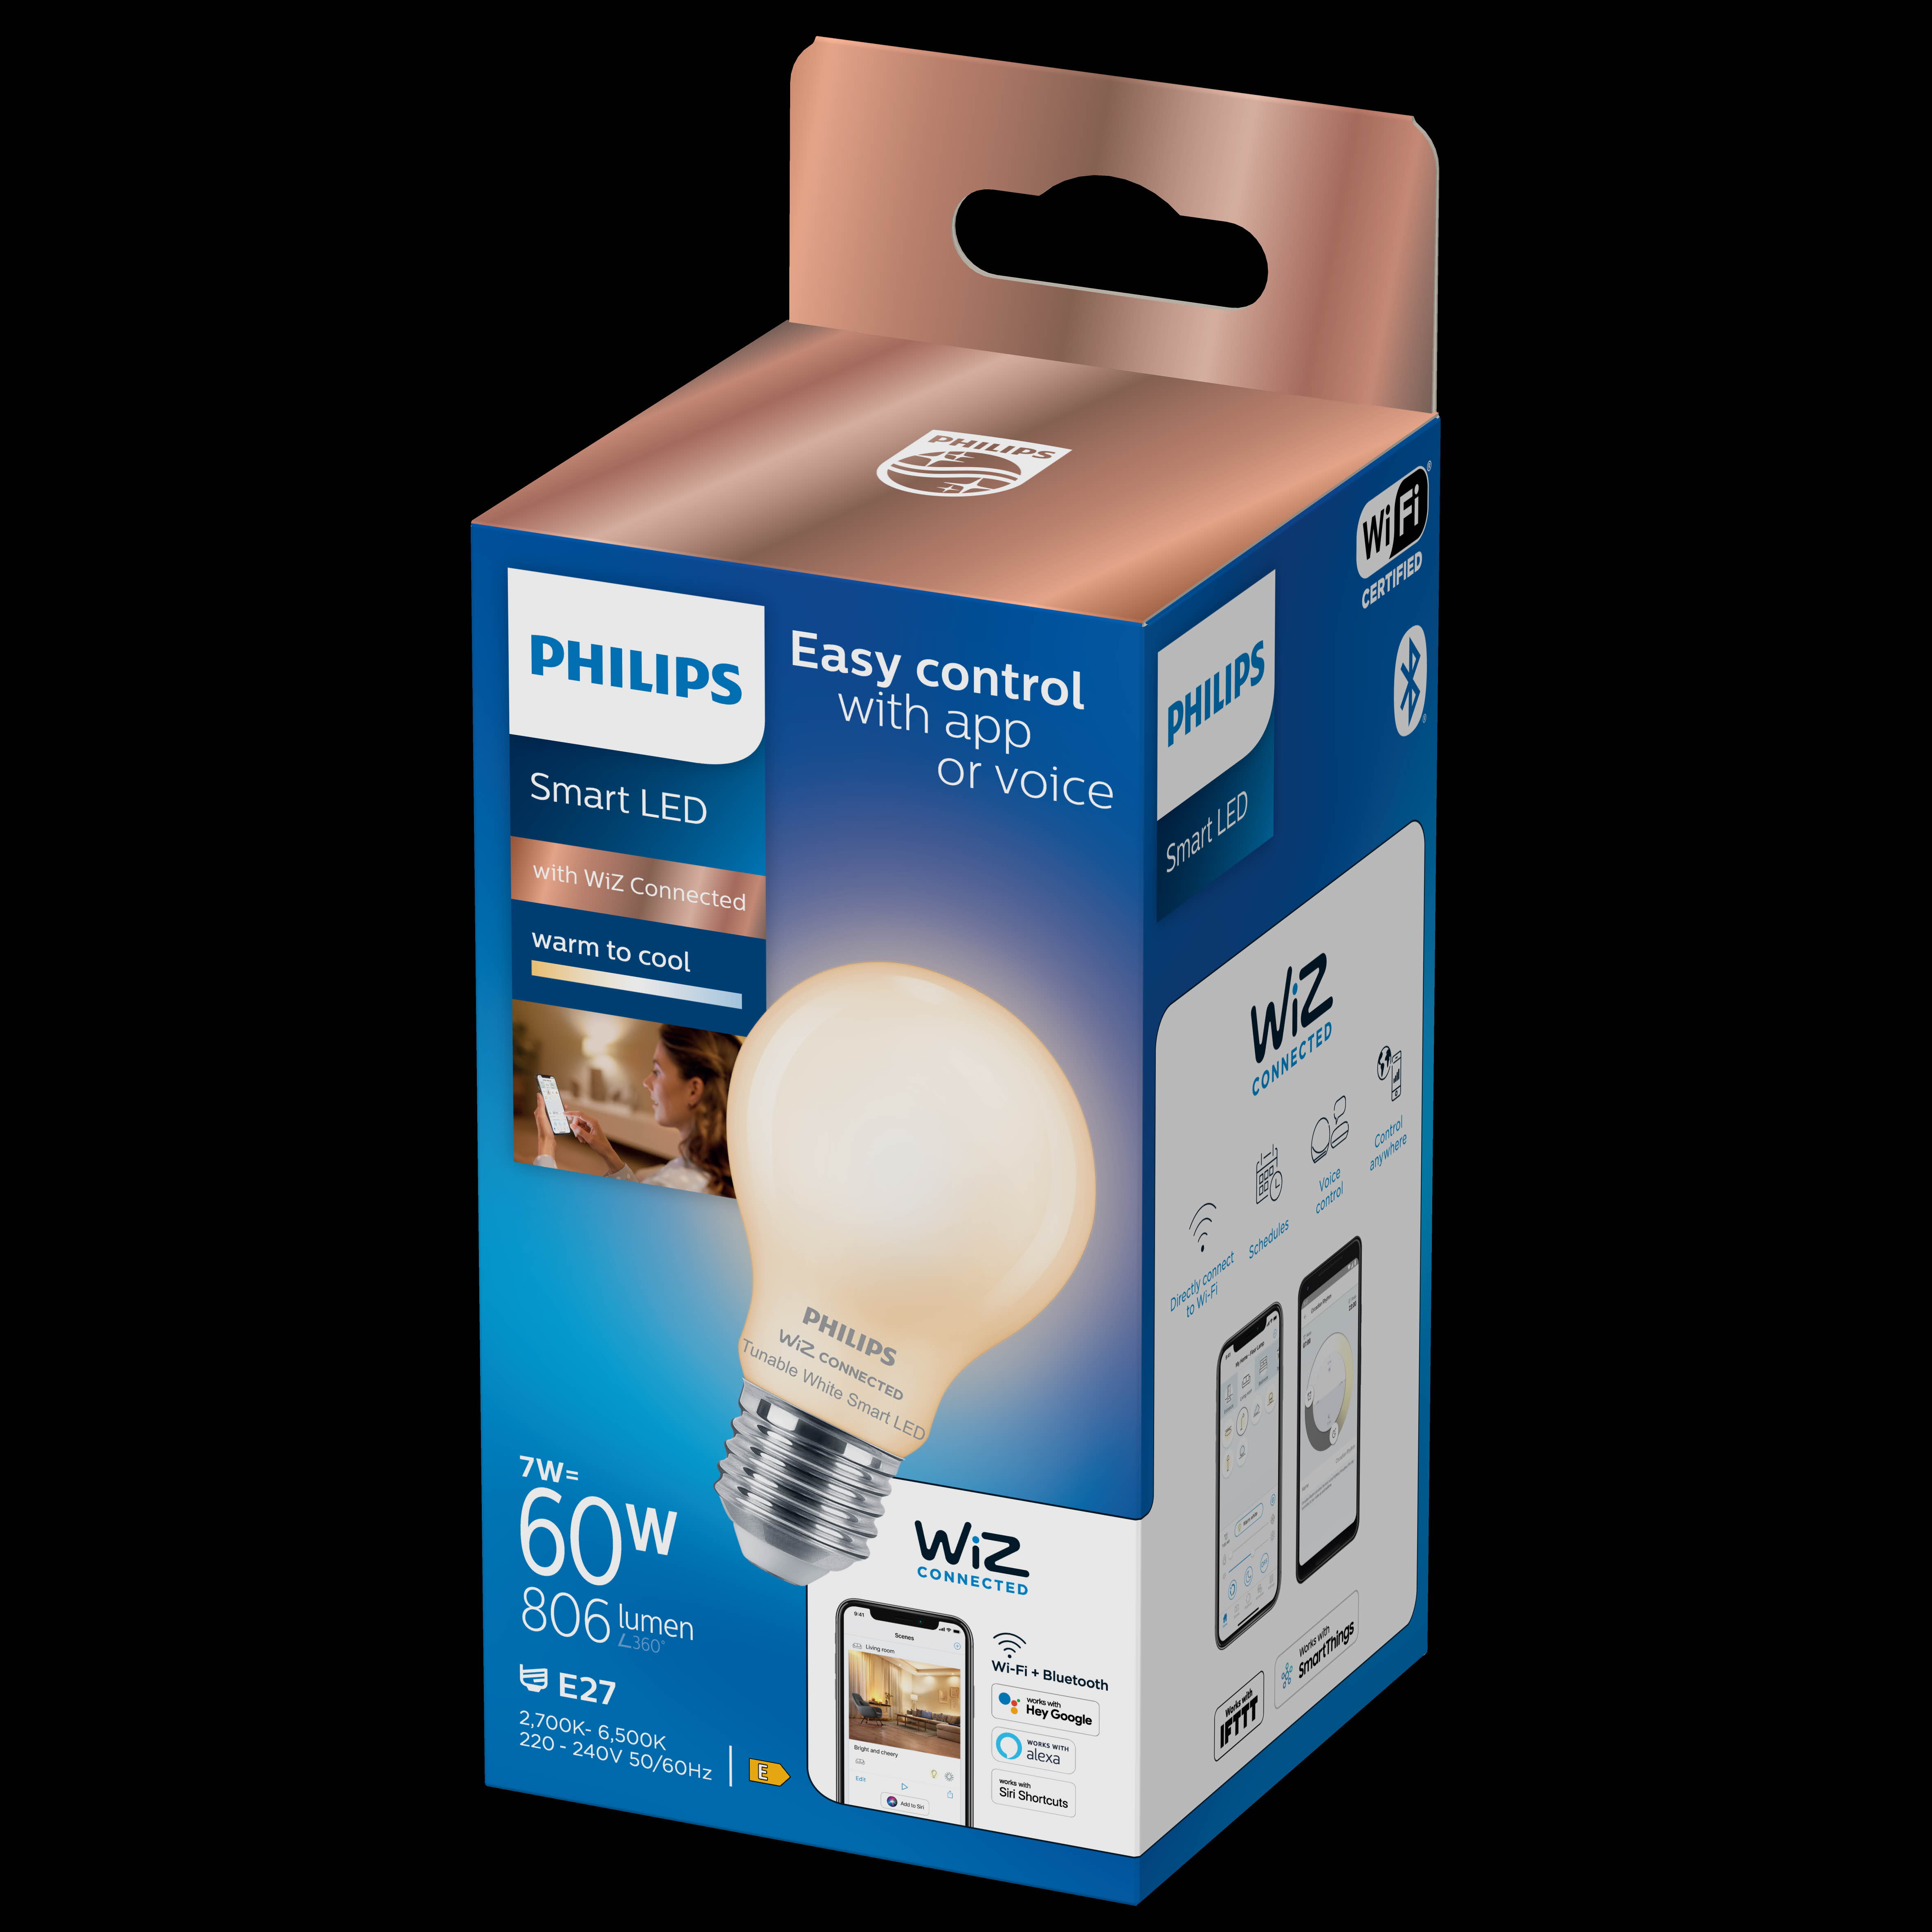 PHILIPS Smart LED E27, WiZ connected, 7 W, 806 lm, satiniert, dimmbar